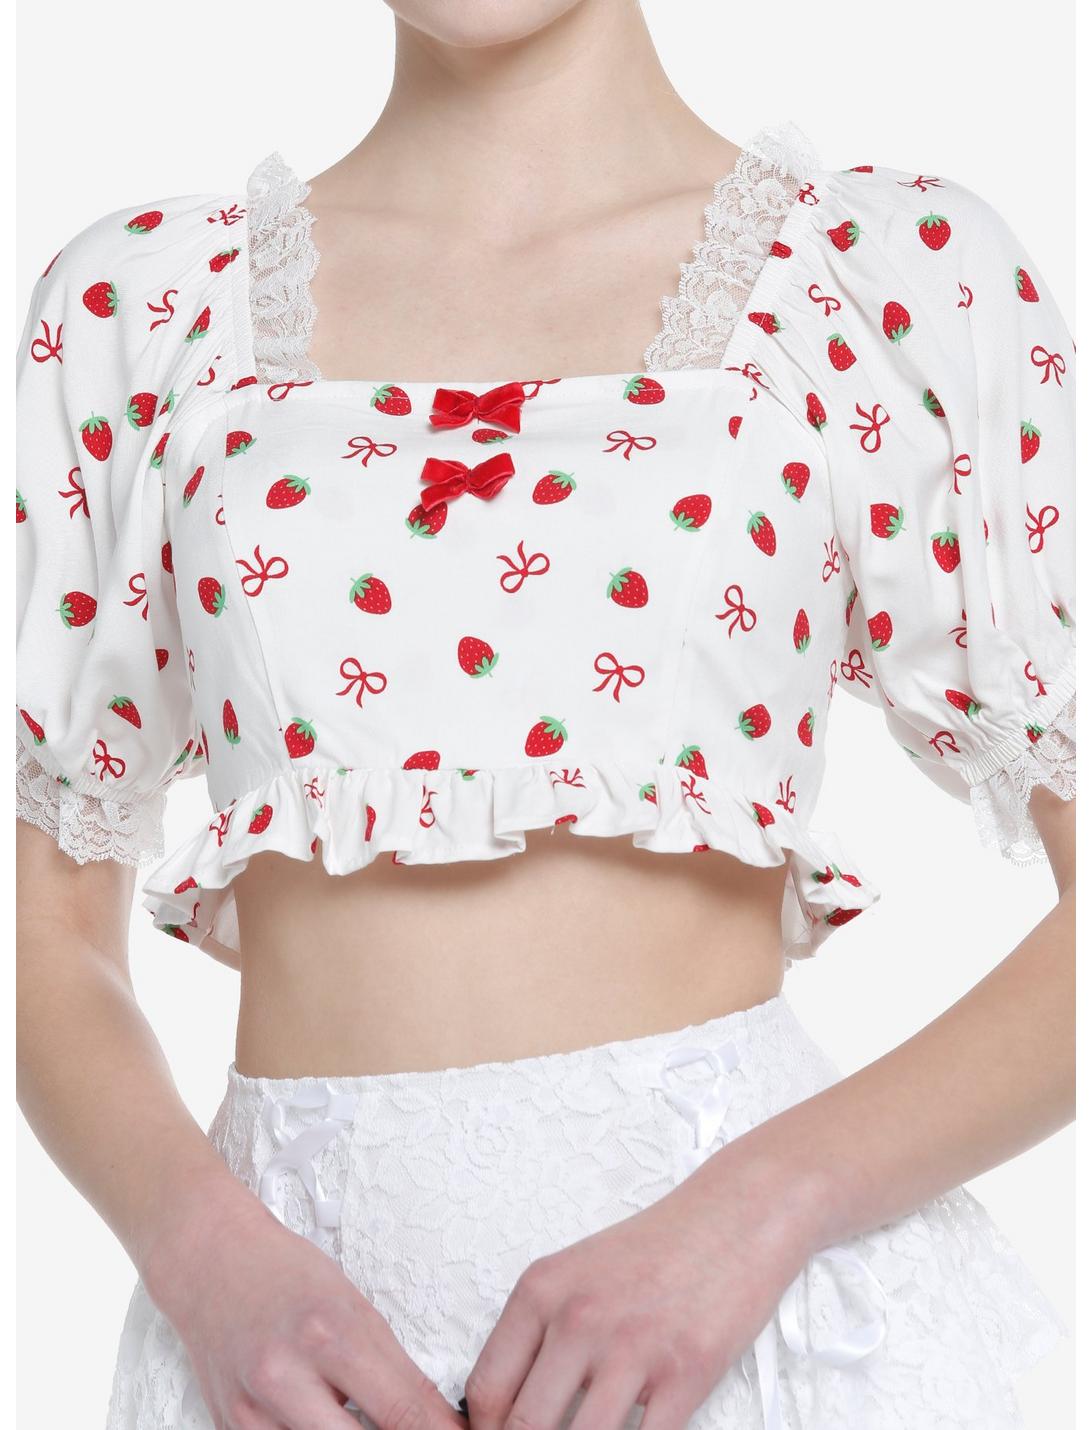 Strawberries & Bows Crop Girls Woven Top, WHITE, hi-res